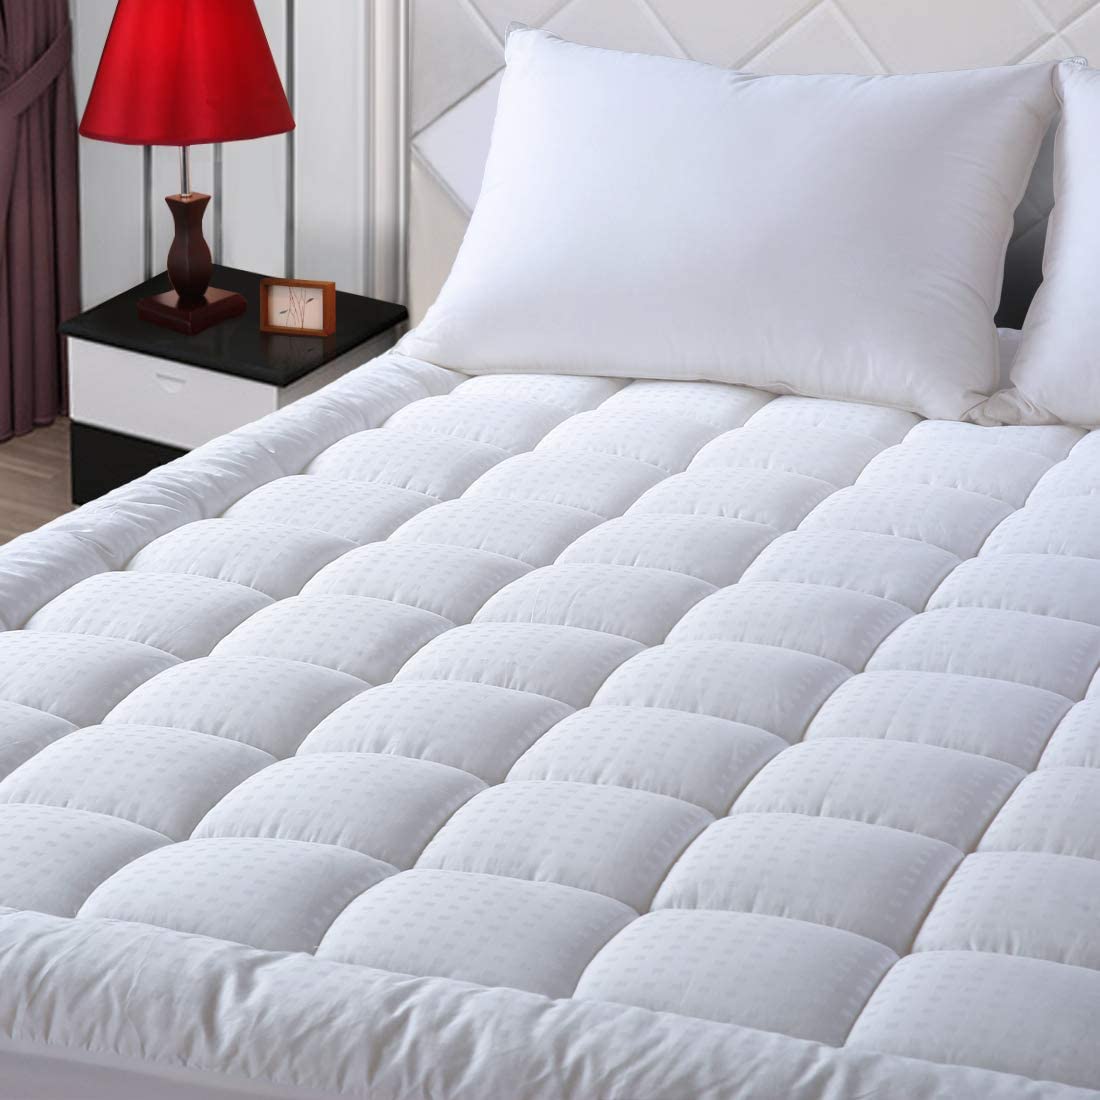 72x80 Inches, White EASELAND RV King Mattress Pad Pillow Top Mattress Cover Quilted Fitted Mattress Protector Cotton Top 8-21 Deep Pocket Cooling Mattress Topper